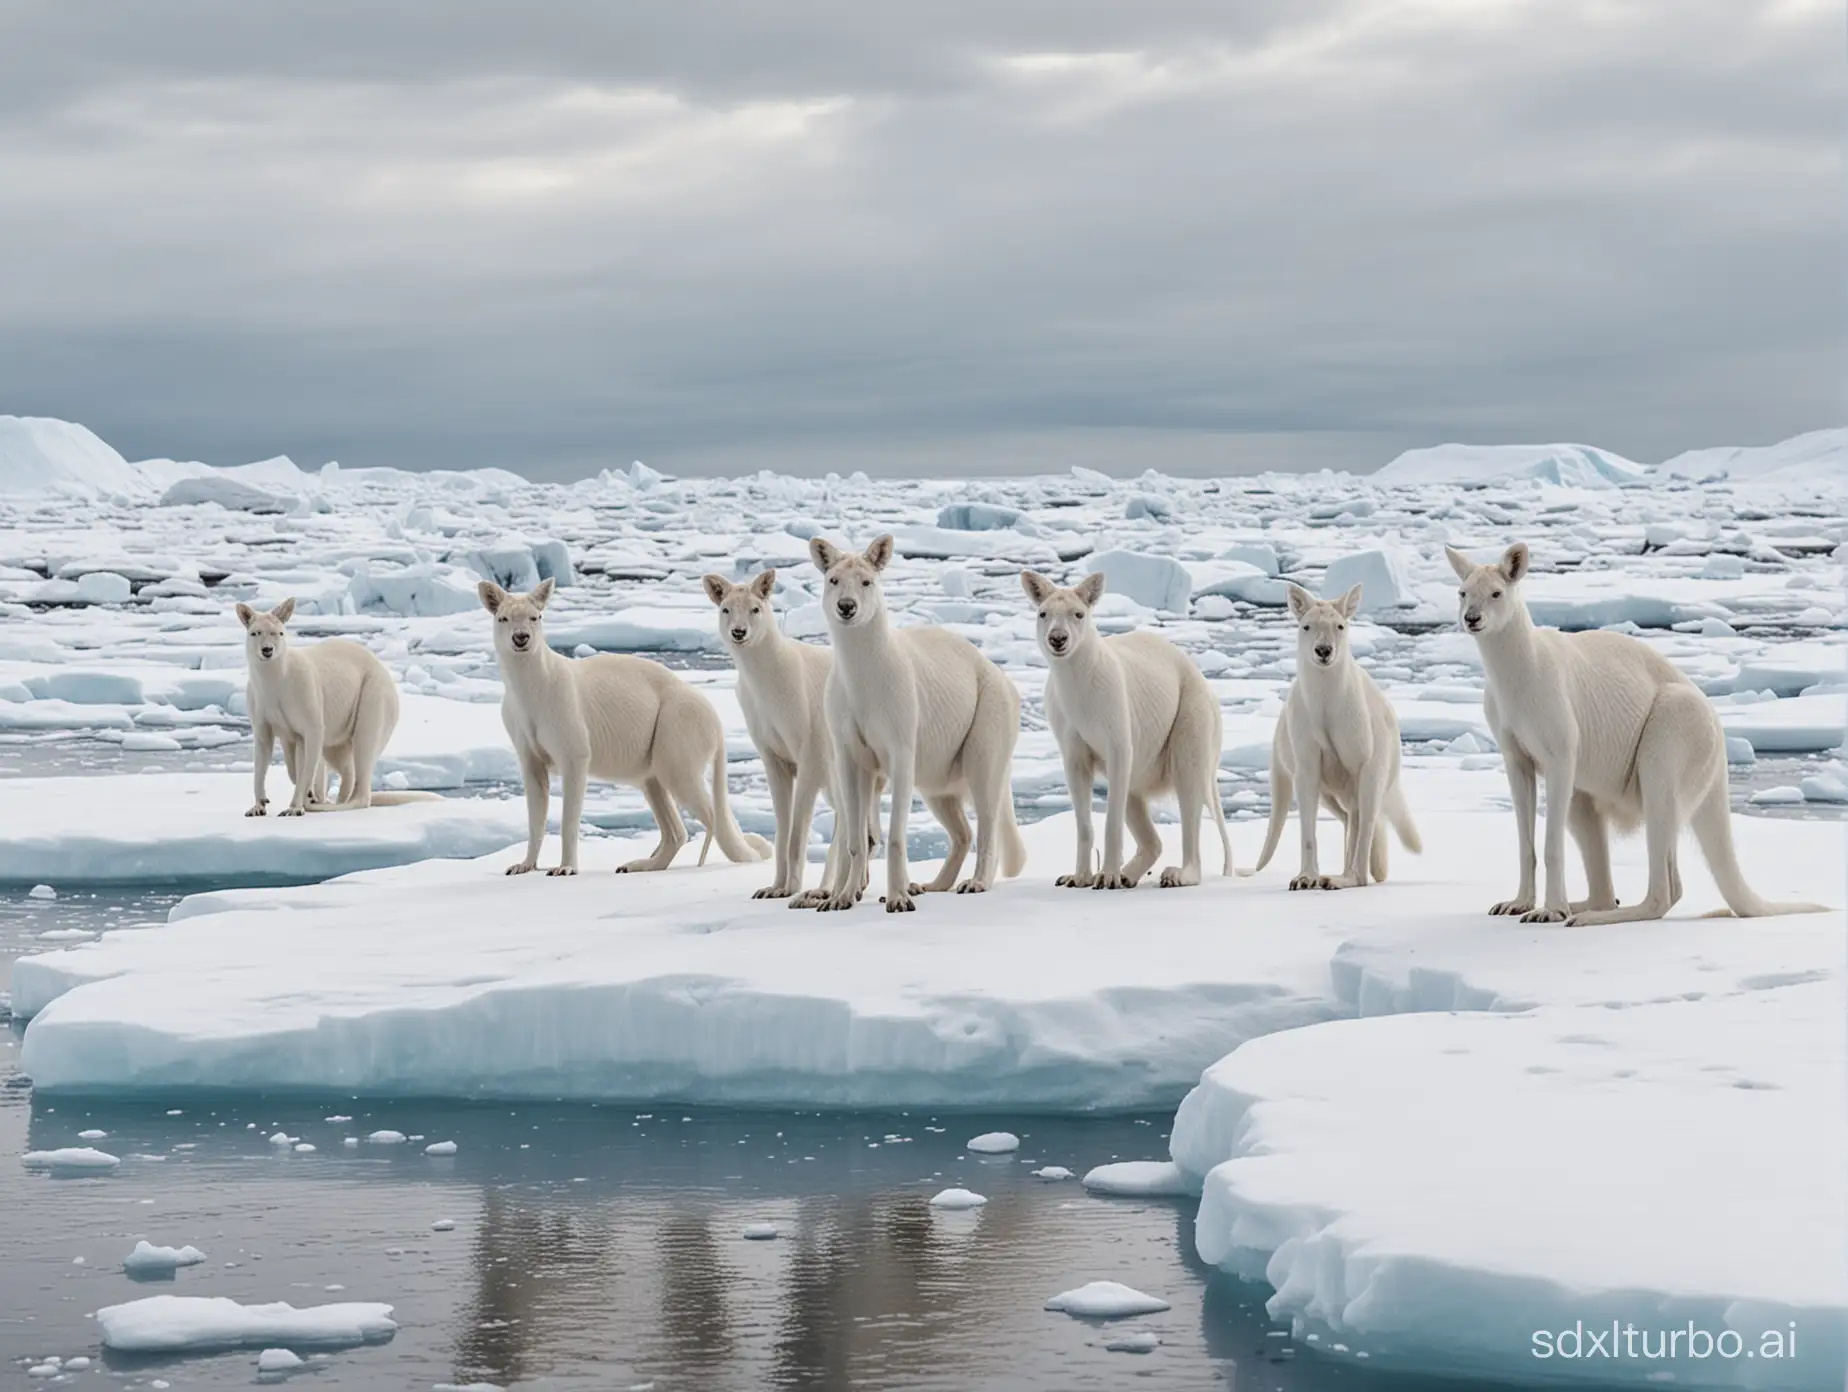 A herd of white albino Kangaroos are far up in the frozen arctic on the ice flows. Ice bergs and vast expanses of snow are seen in the background. Extremely photo realistic all white fur kangaroos.